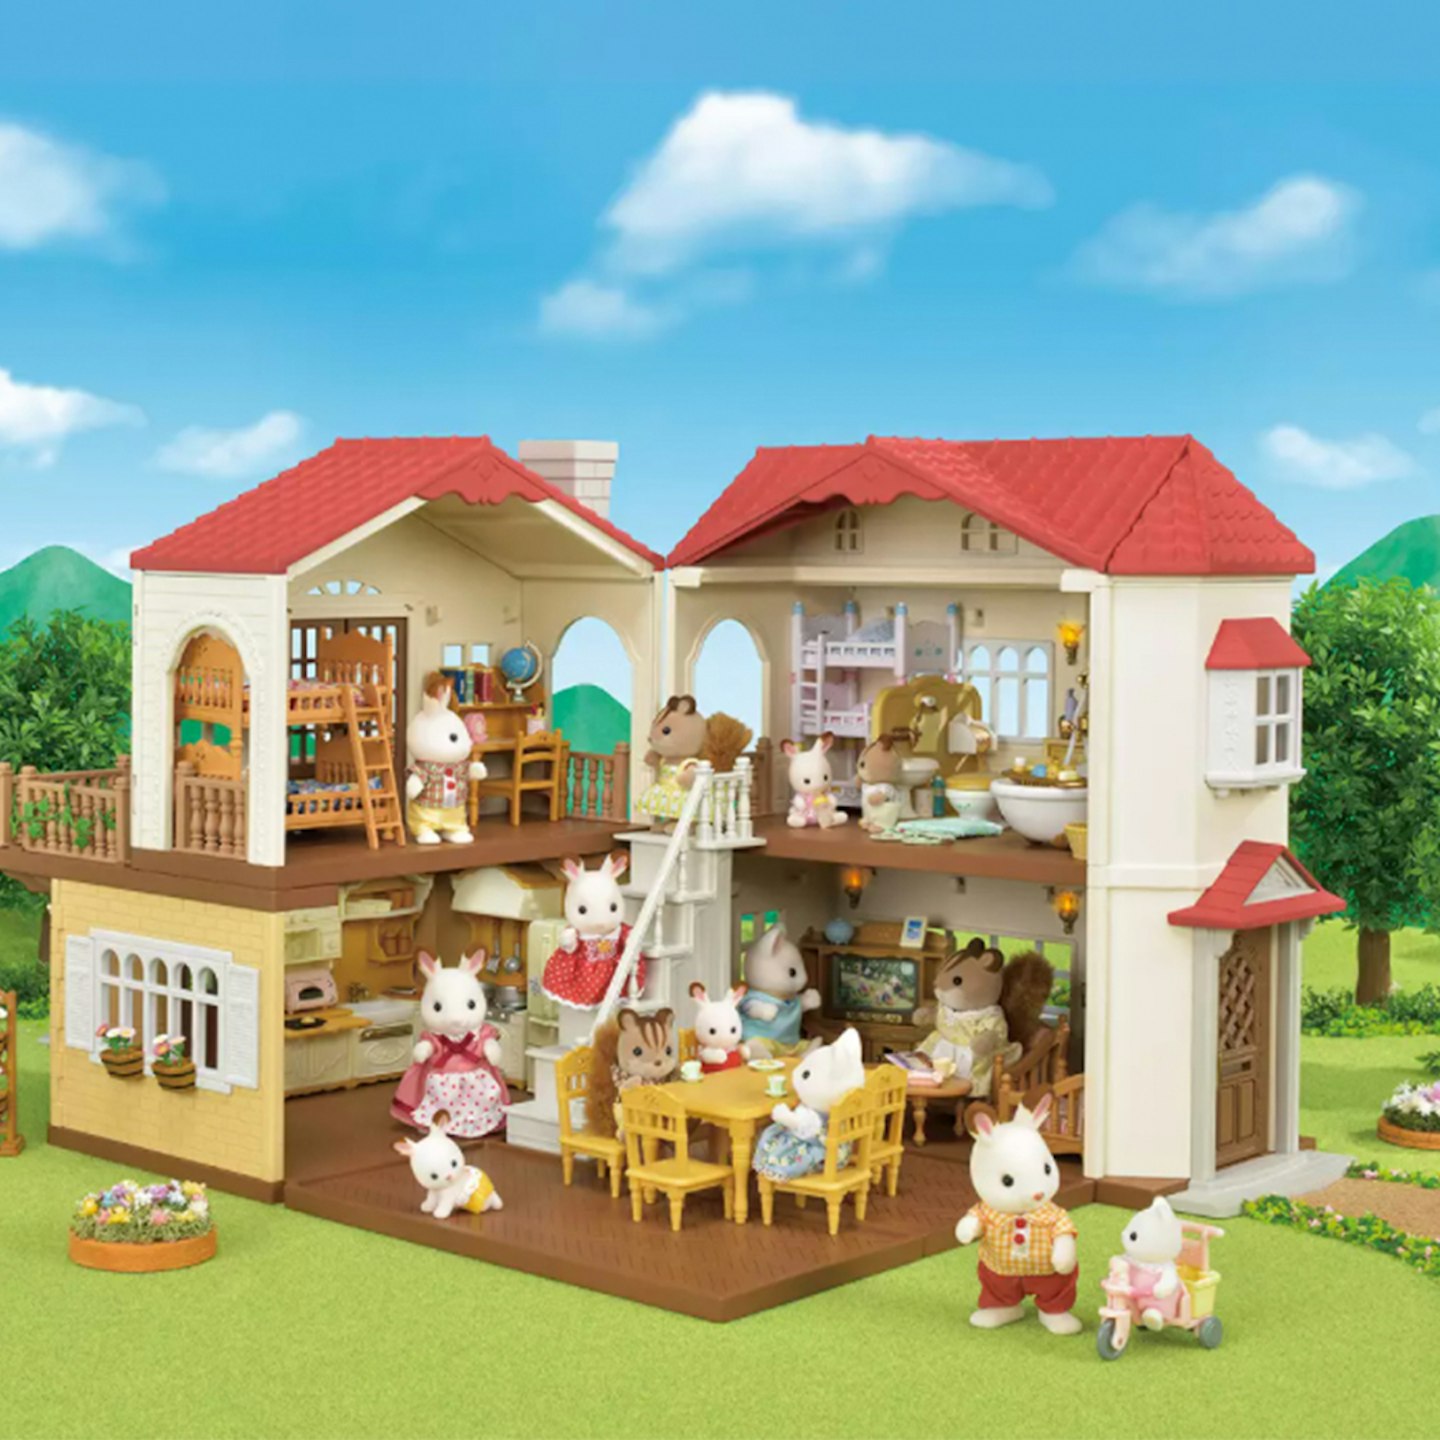 Creative Play With Sylvanian Families Playsets - Sticky Mud